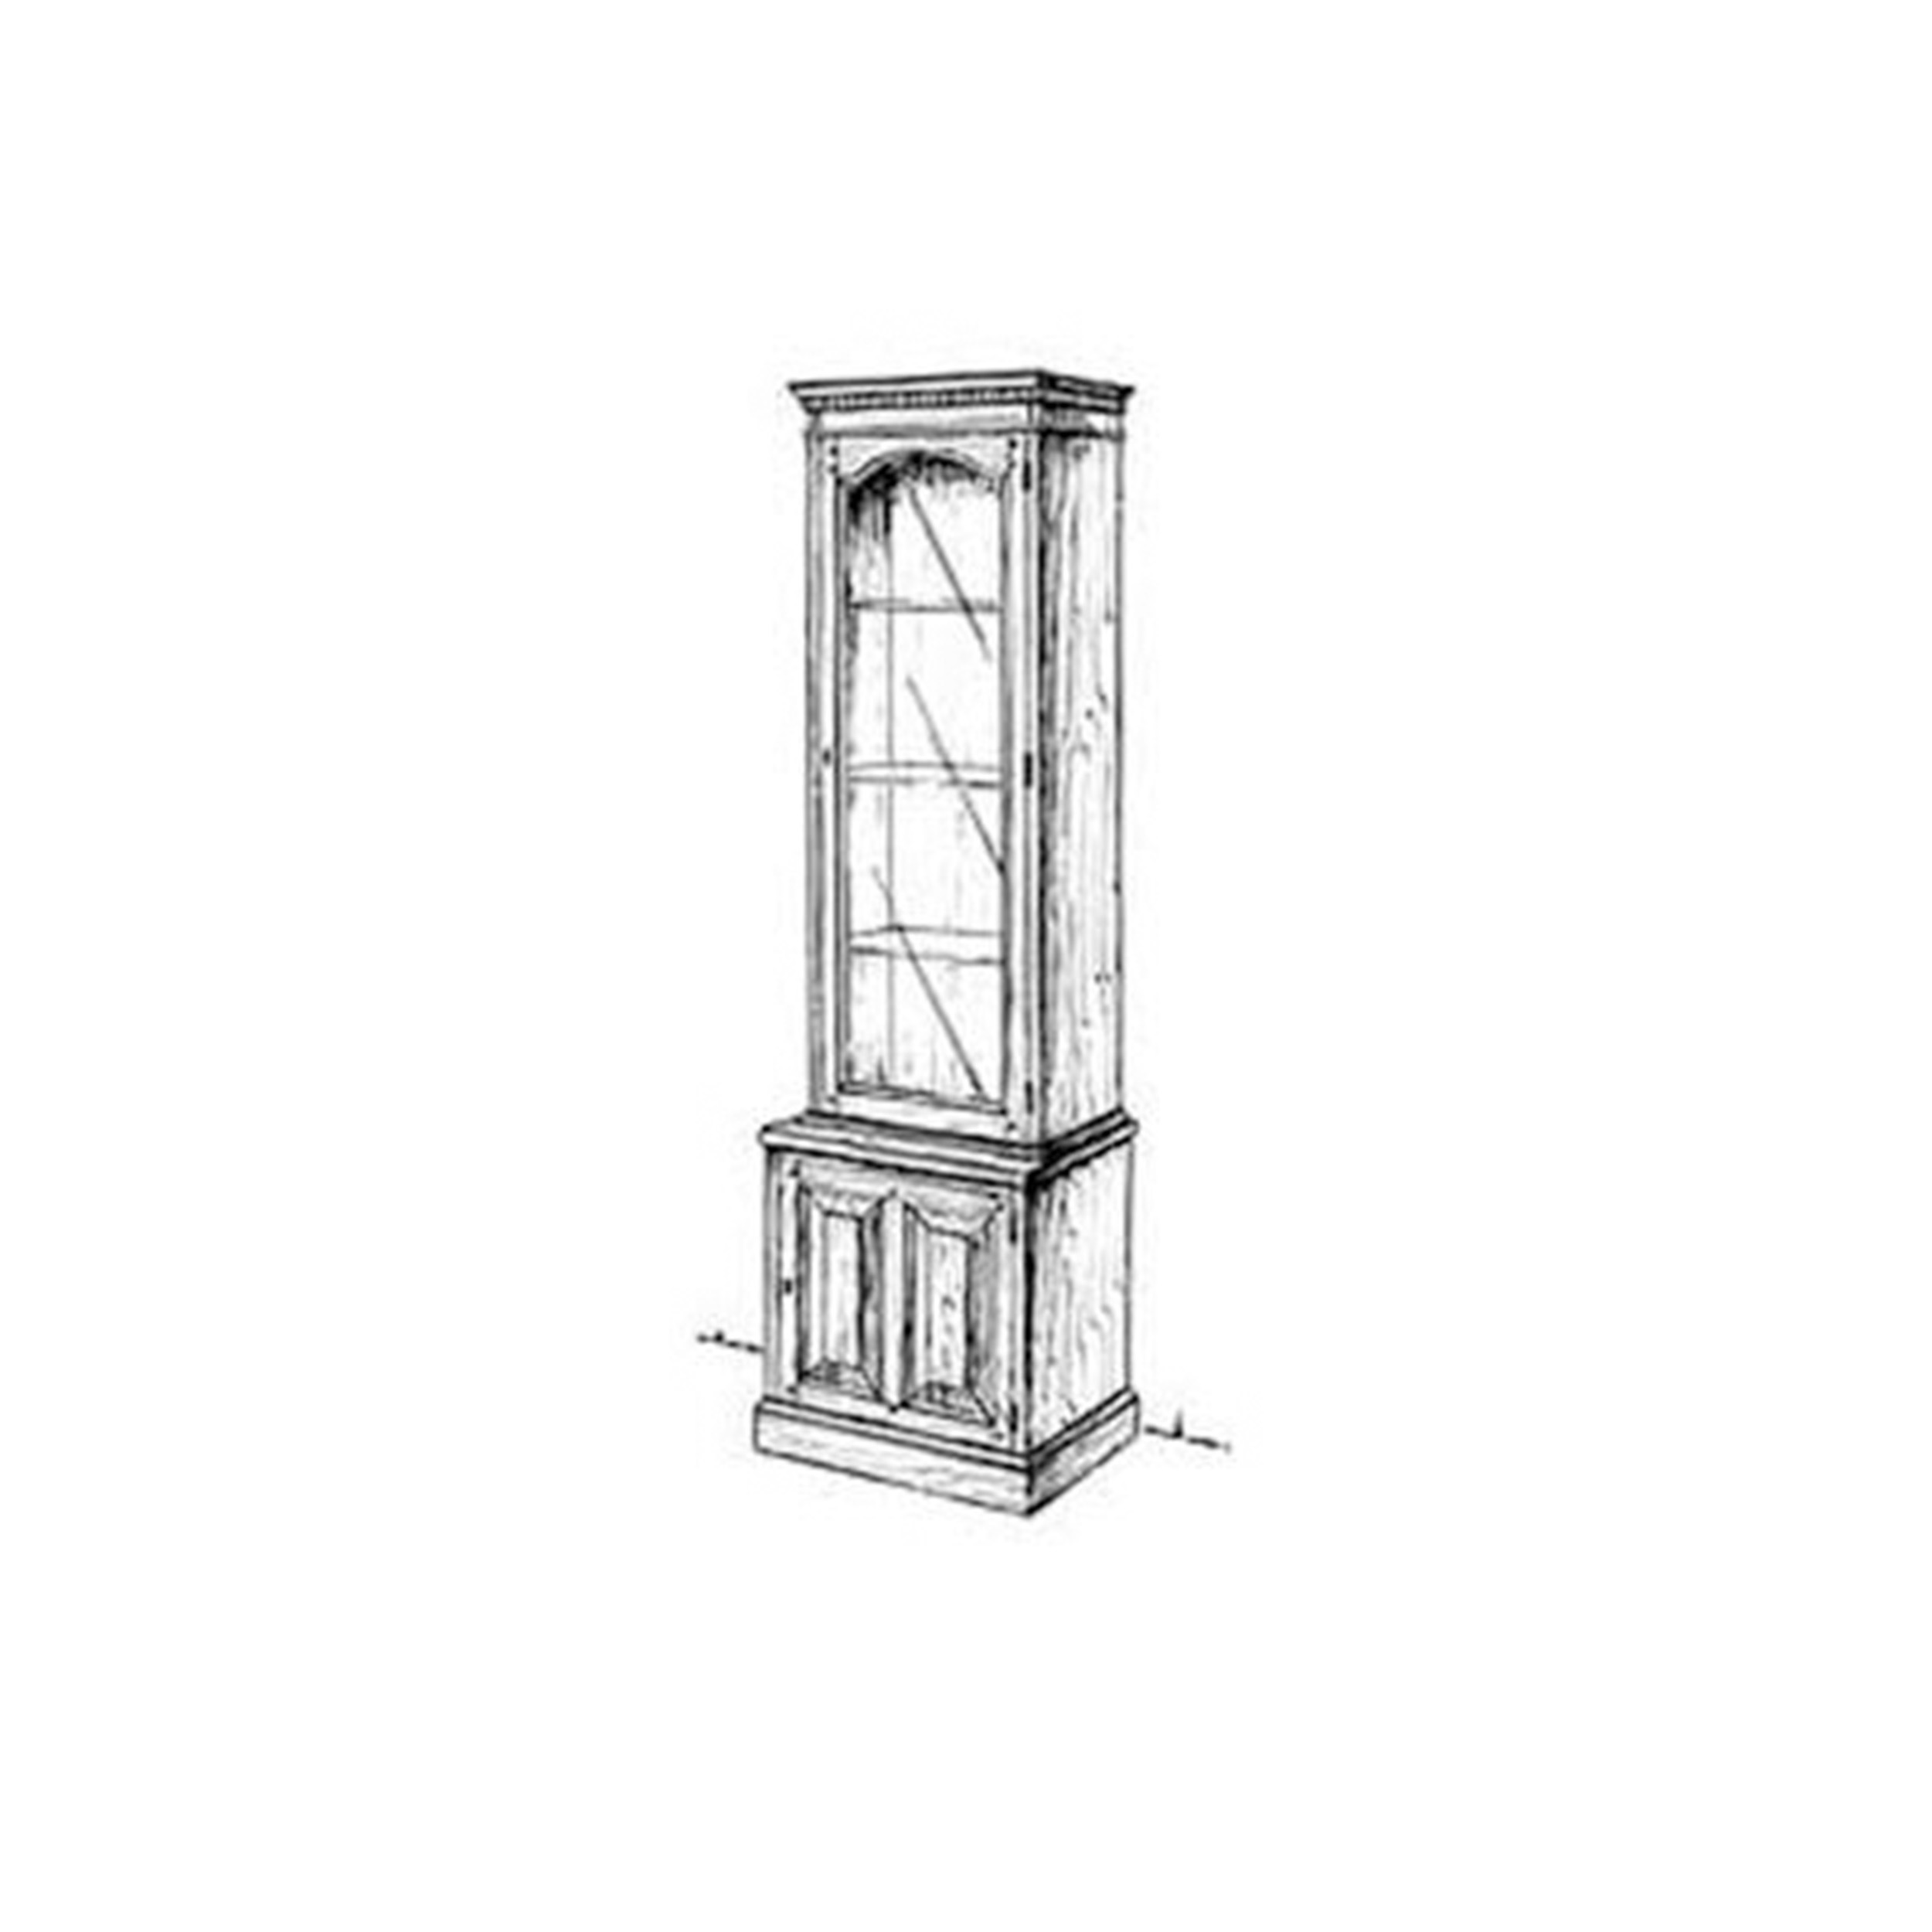 Woodworking Project Paper Plan To Build Slim Curio Cabinet